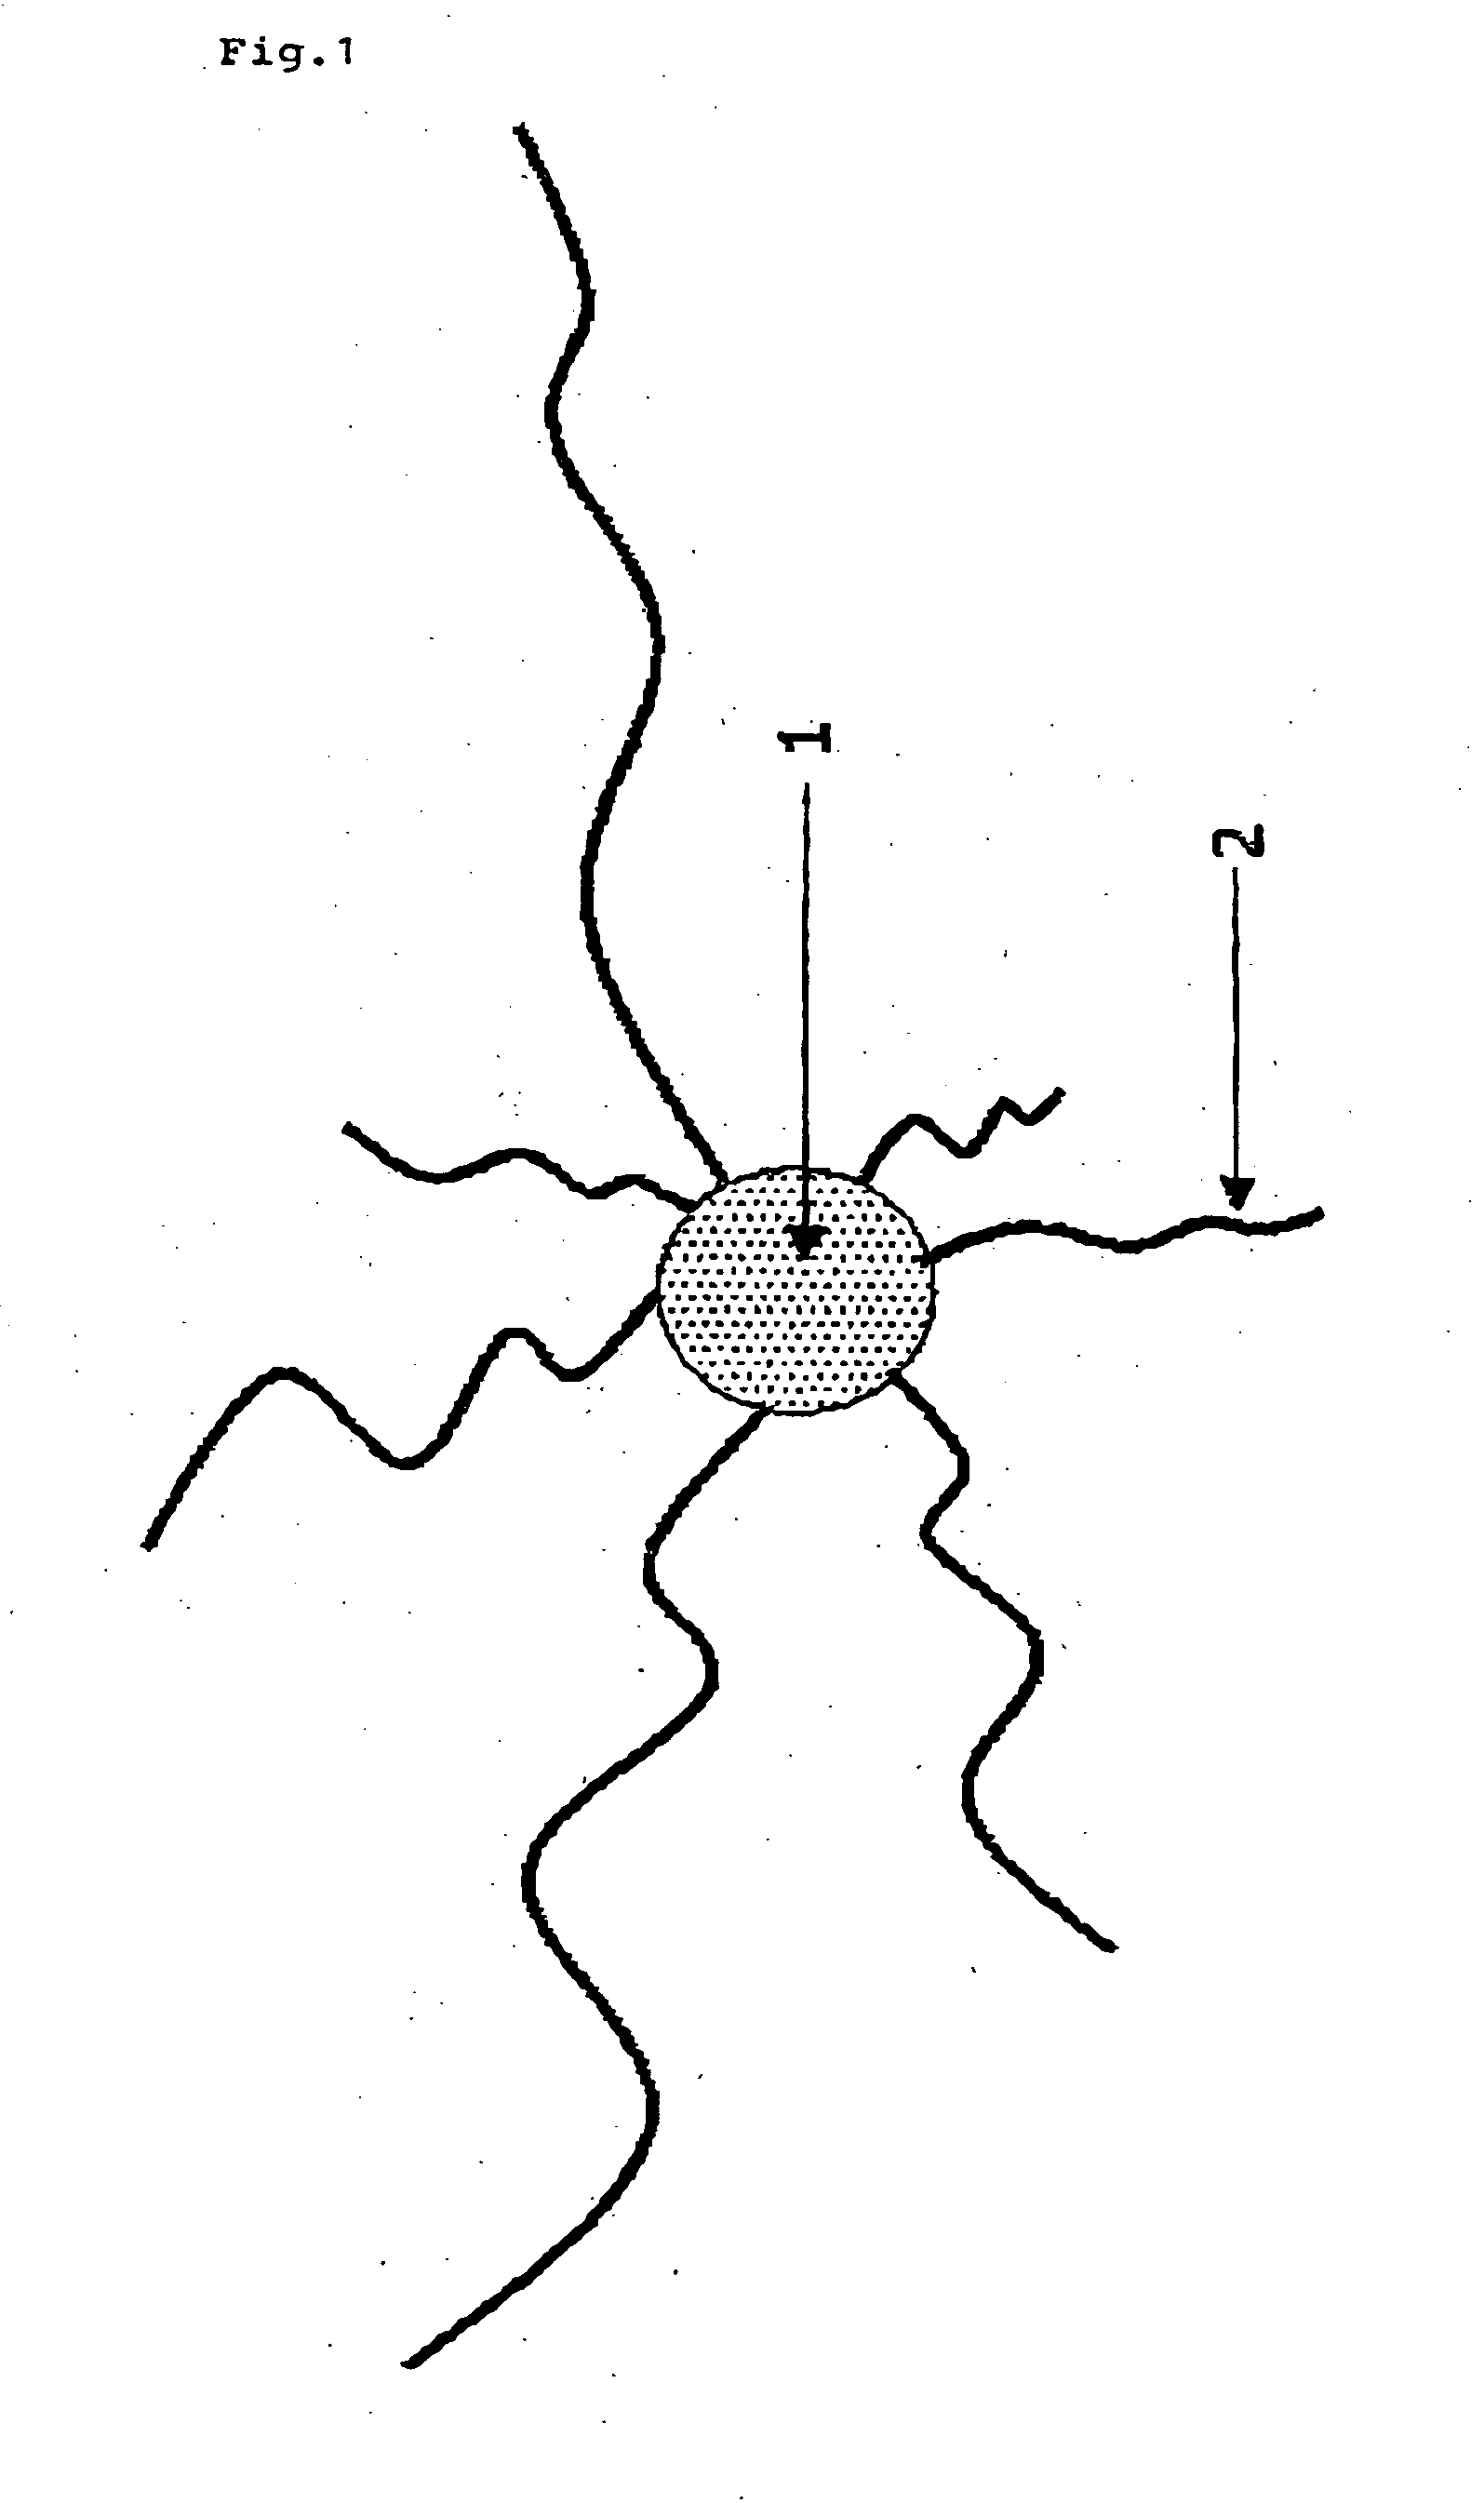 Functional Filler and Resin Composition Containing Same